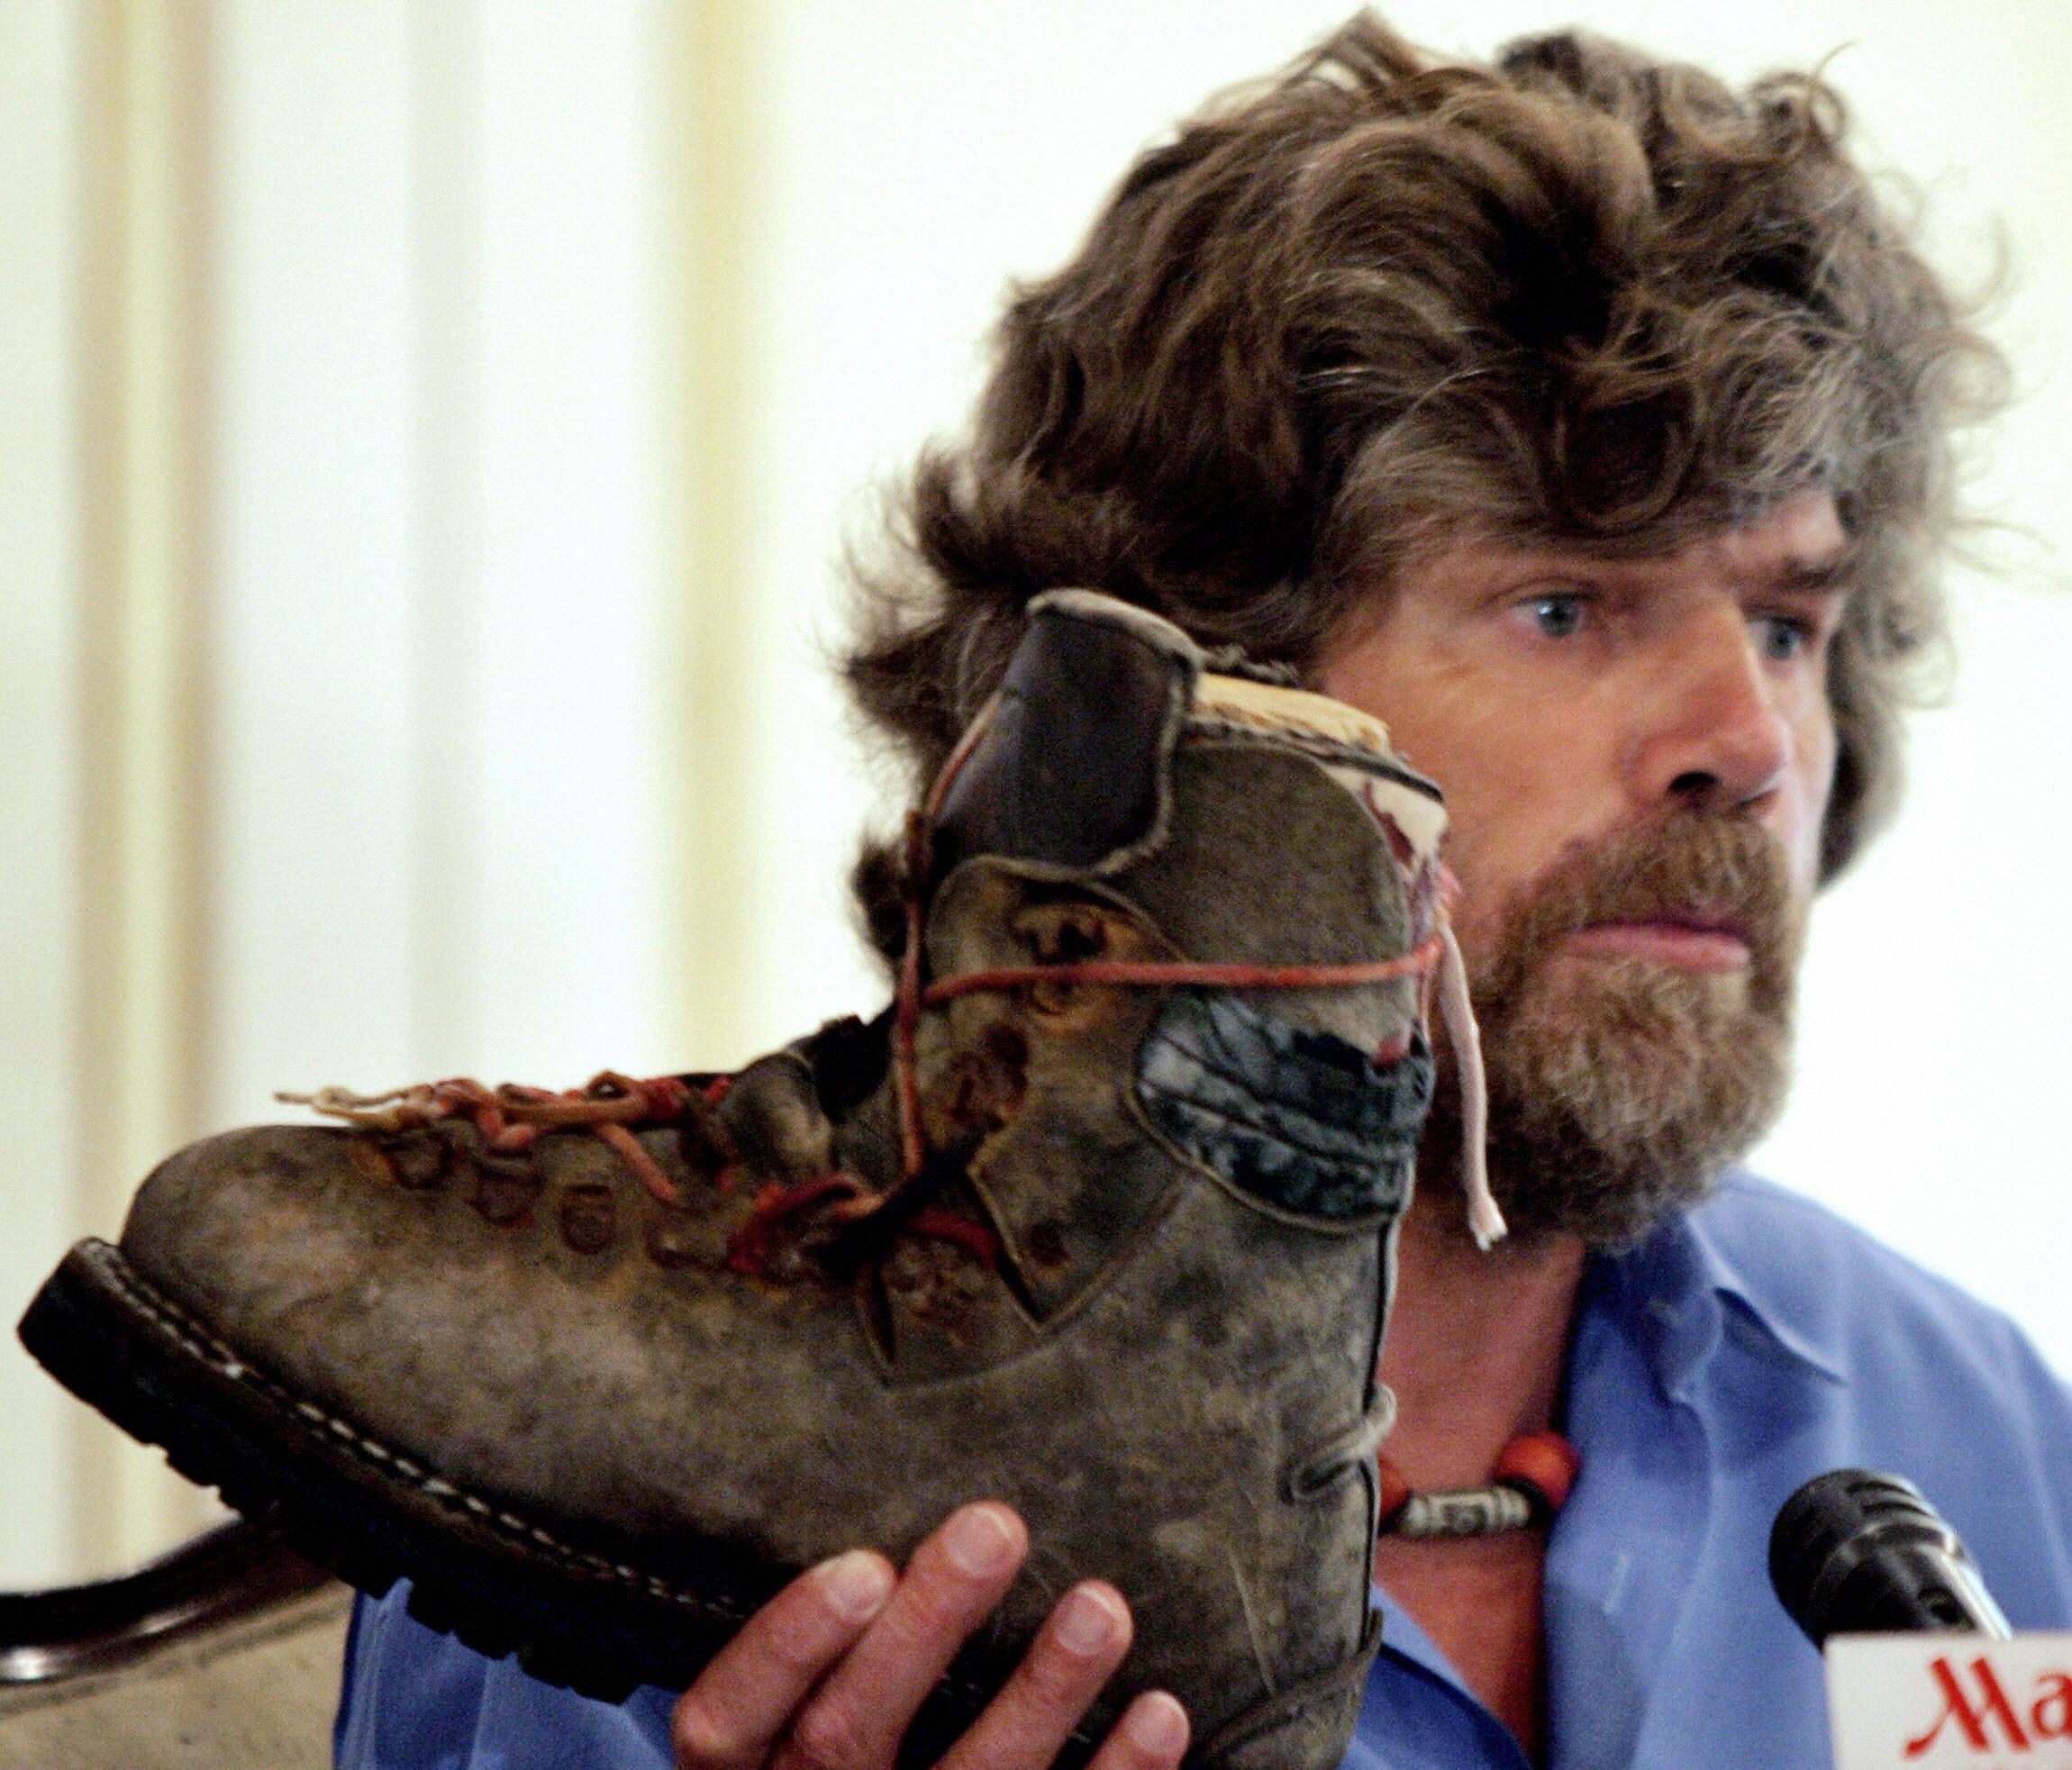 Messner shows a shoe, allegedly part of his brother’s equipment, to media representatives during a press conference in Islamabad in 2005